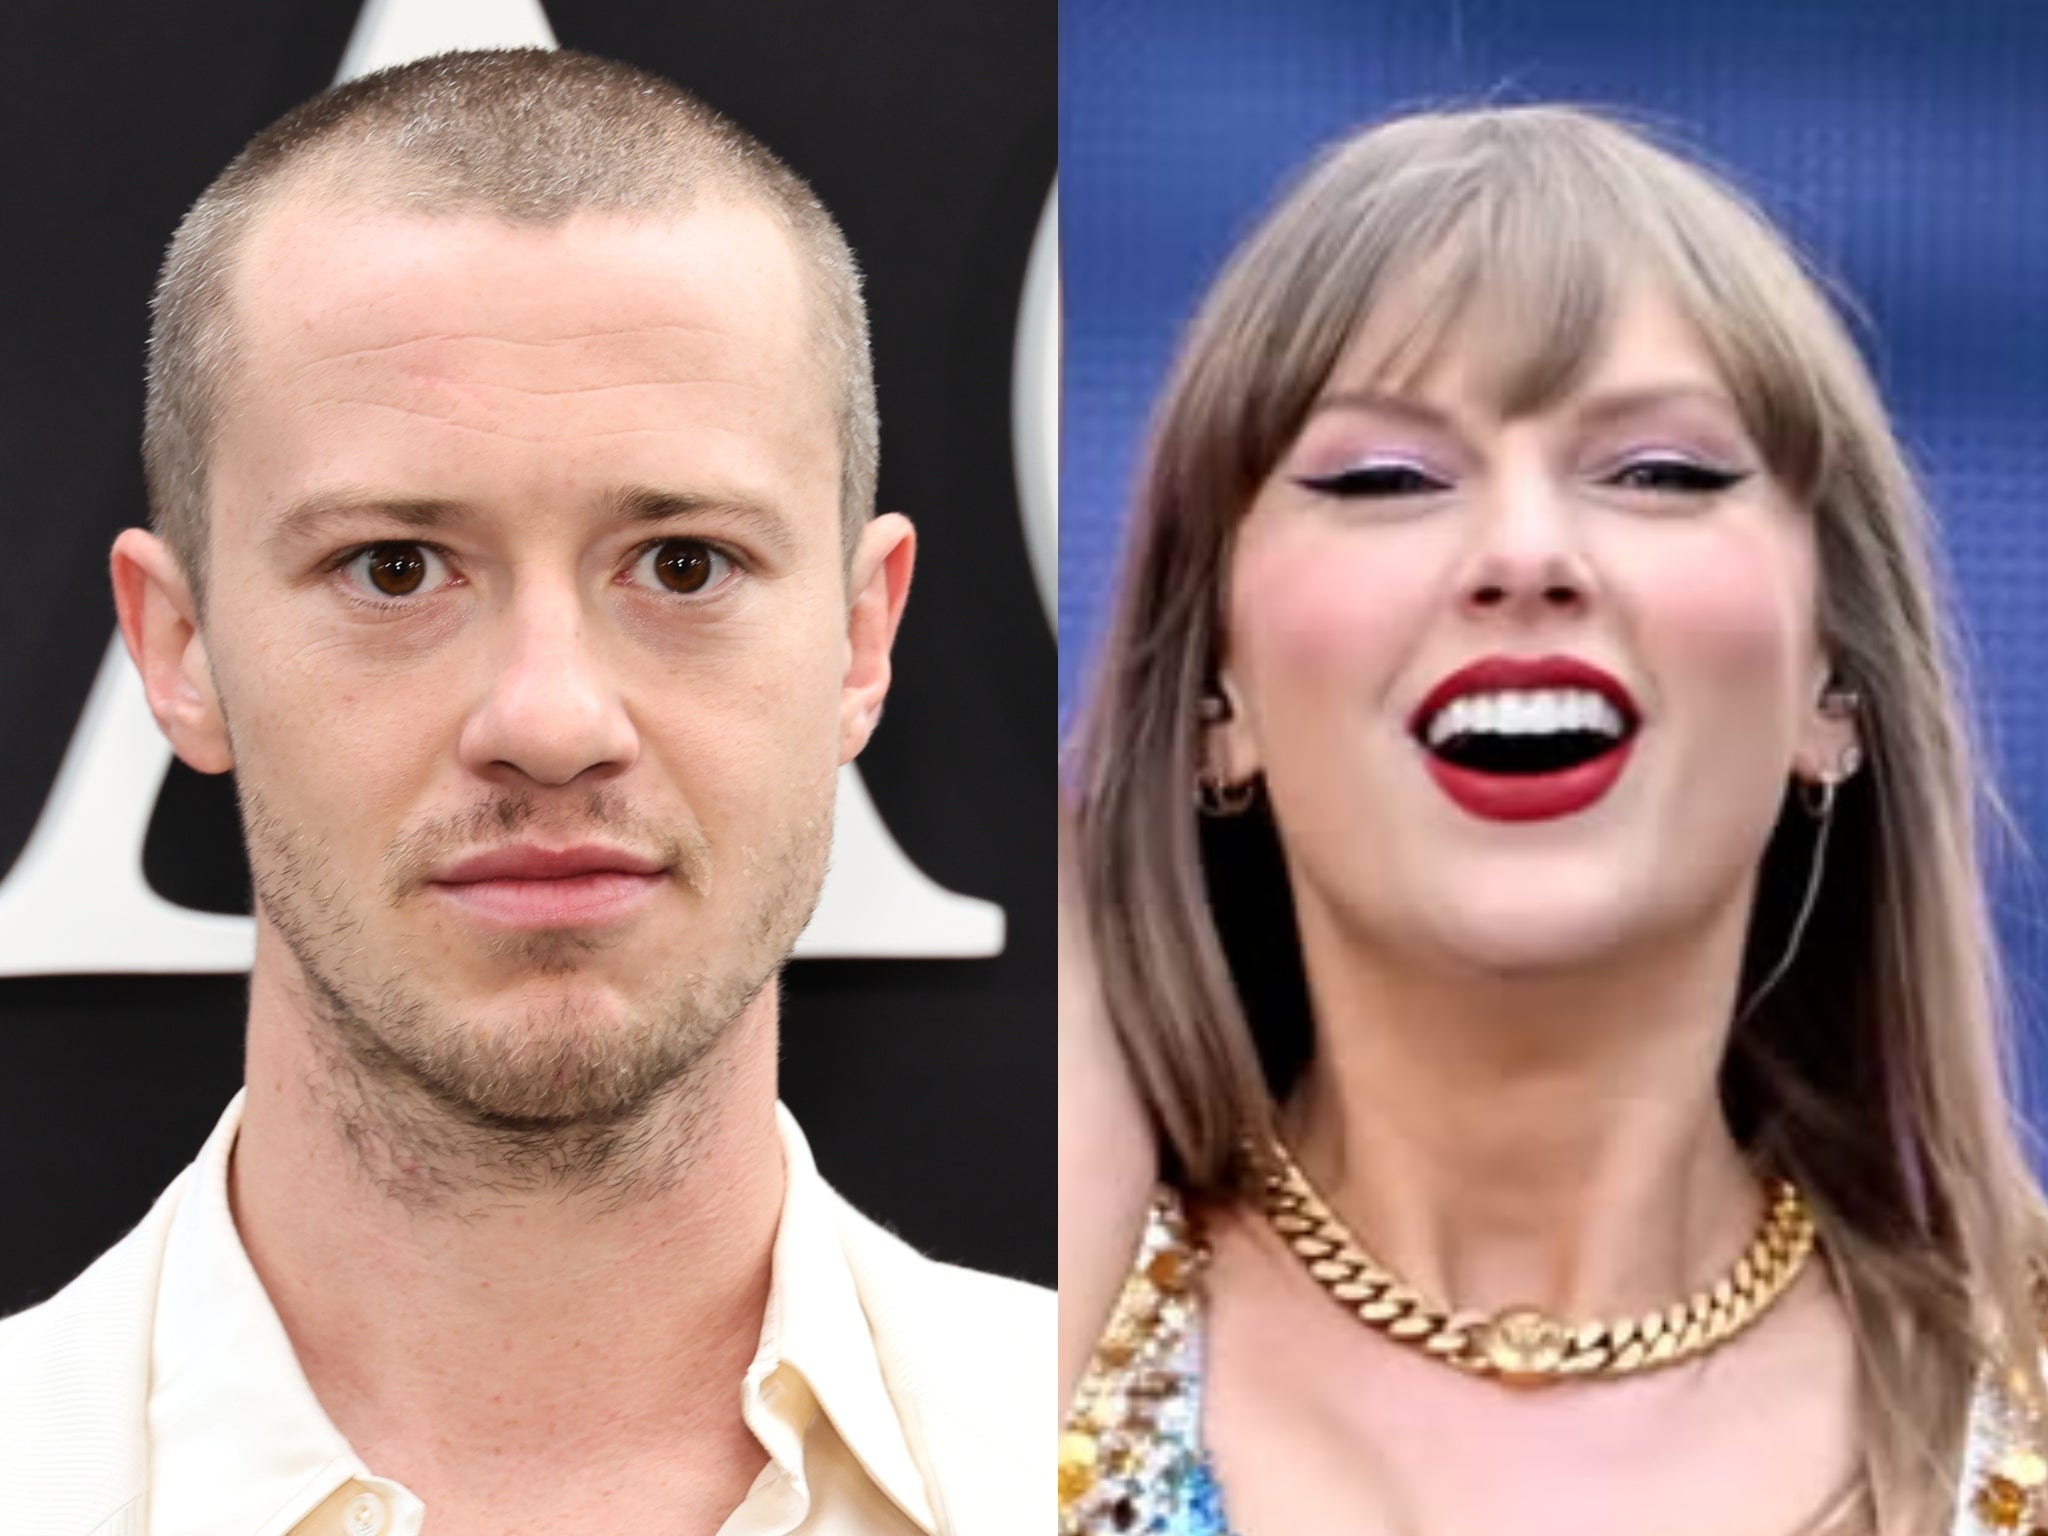 joseph quinn, taylor swift, stranger things, joseph quinn recalls embarrassing first words he said to taylor swift: ‘i meant it as a compliment’